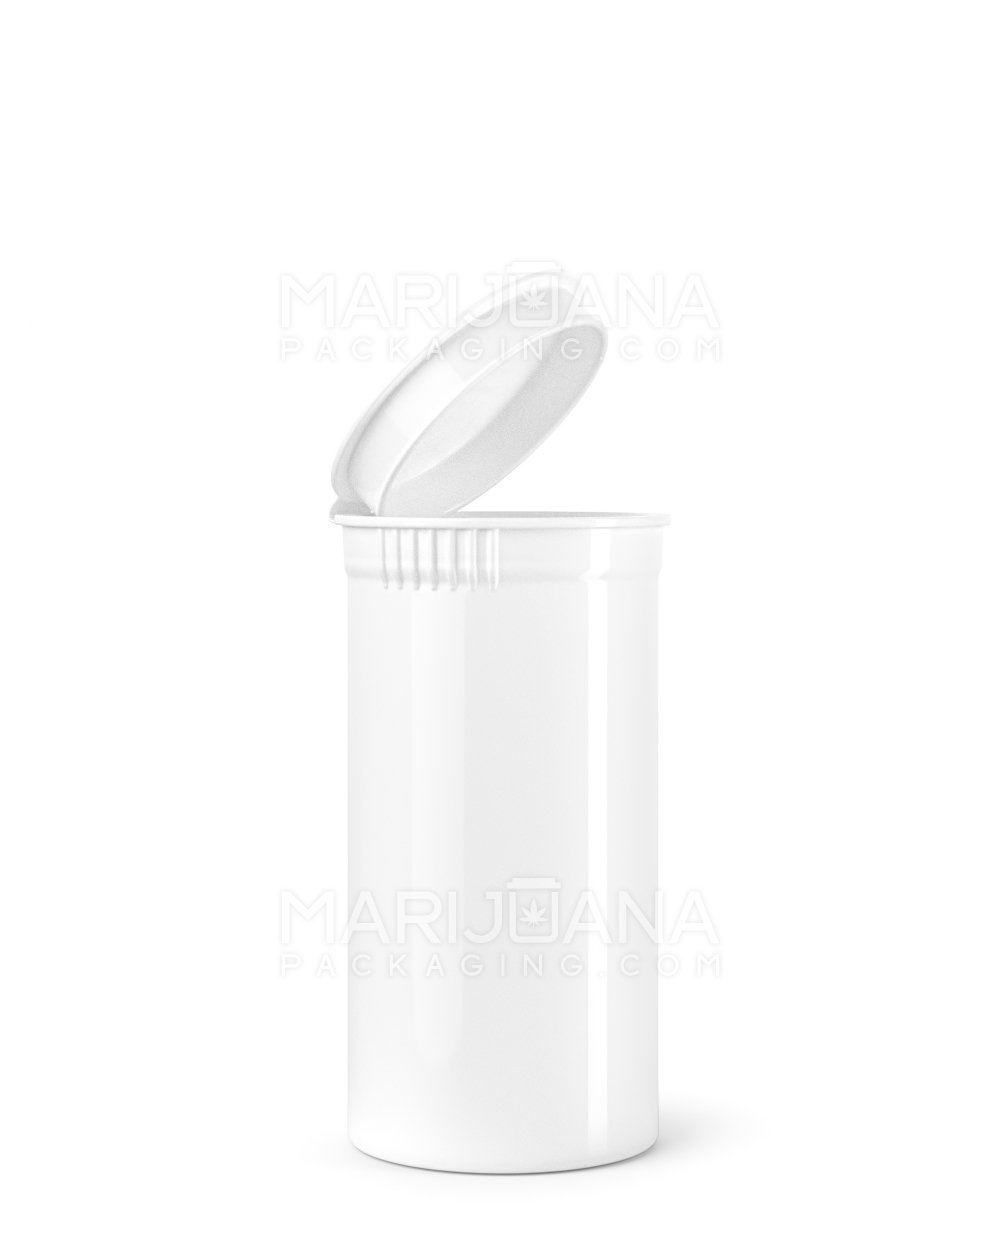 Child Resistant | Opaque White Pop Top Bottles | 13dr - 2g - 315 Count - 1